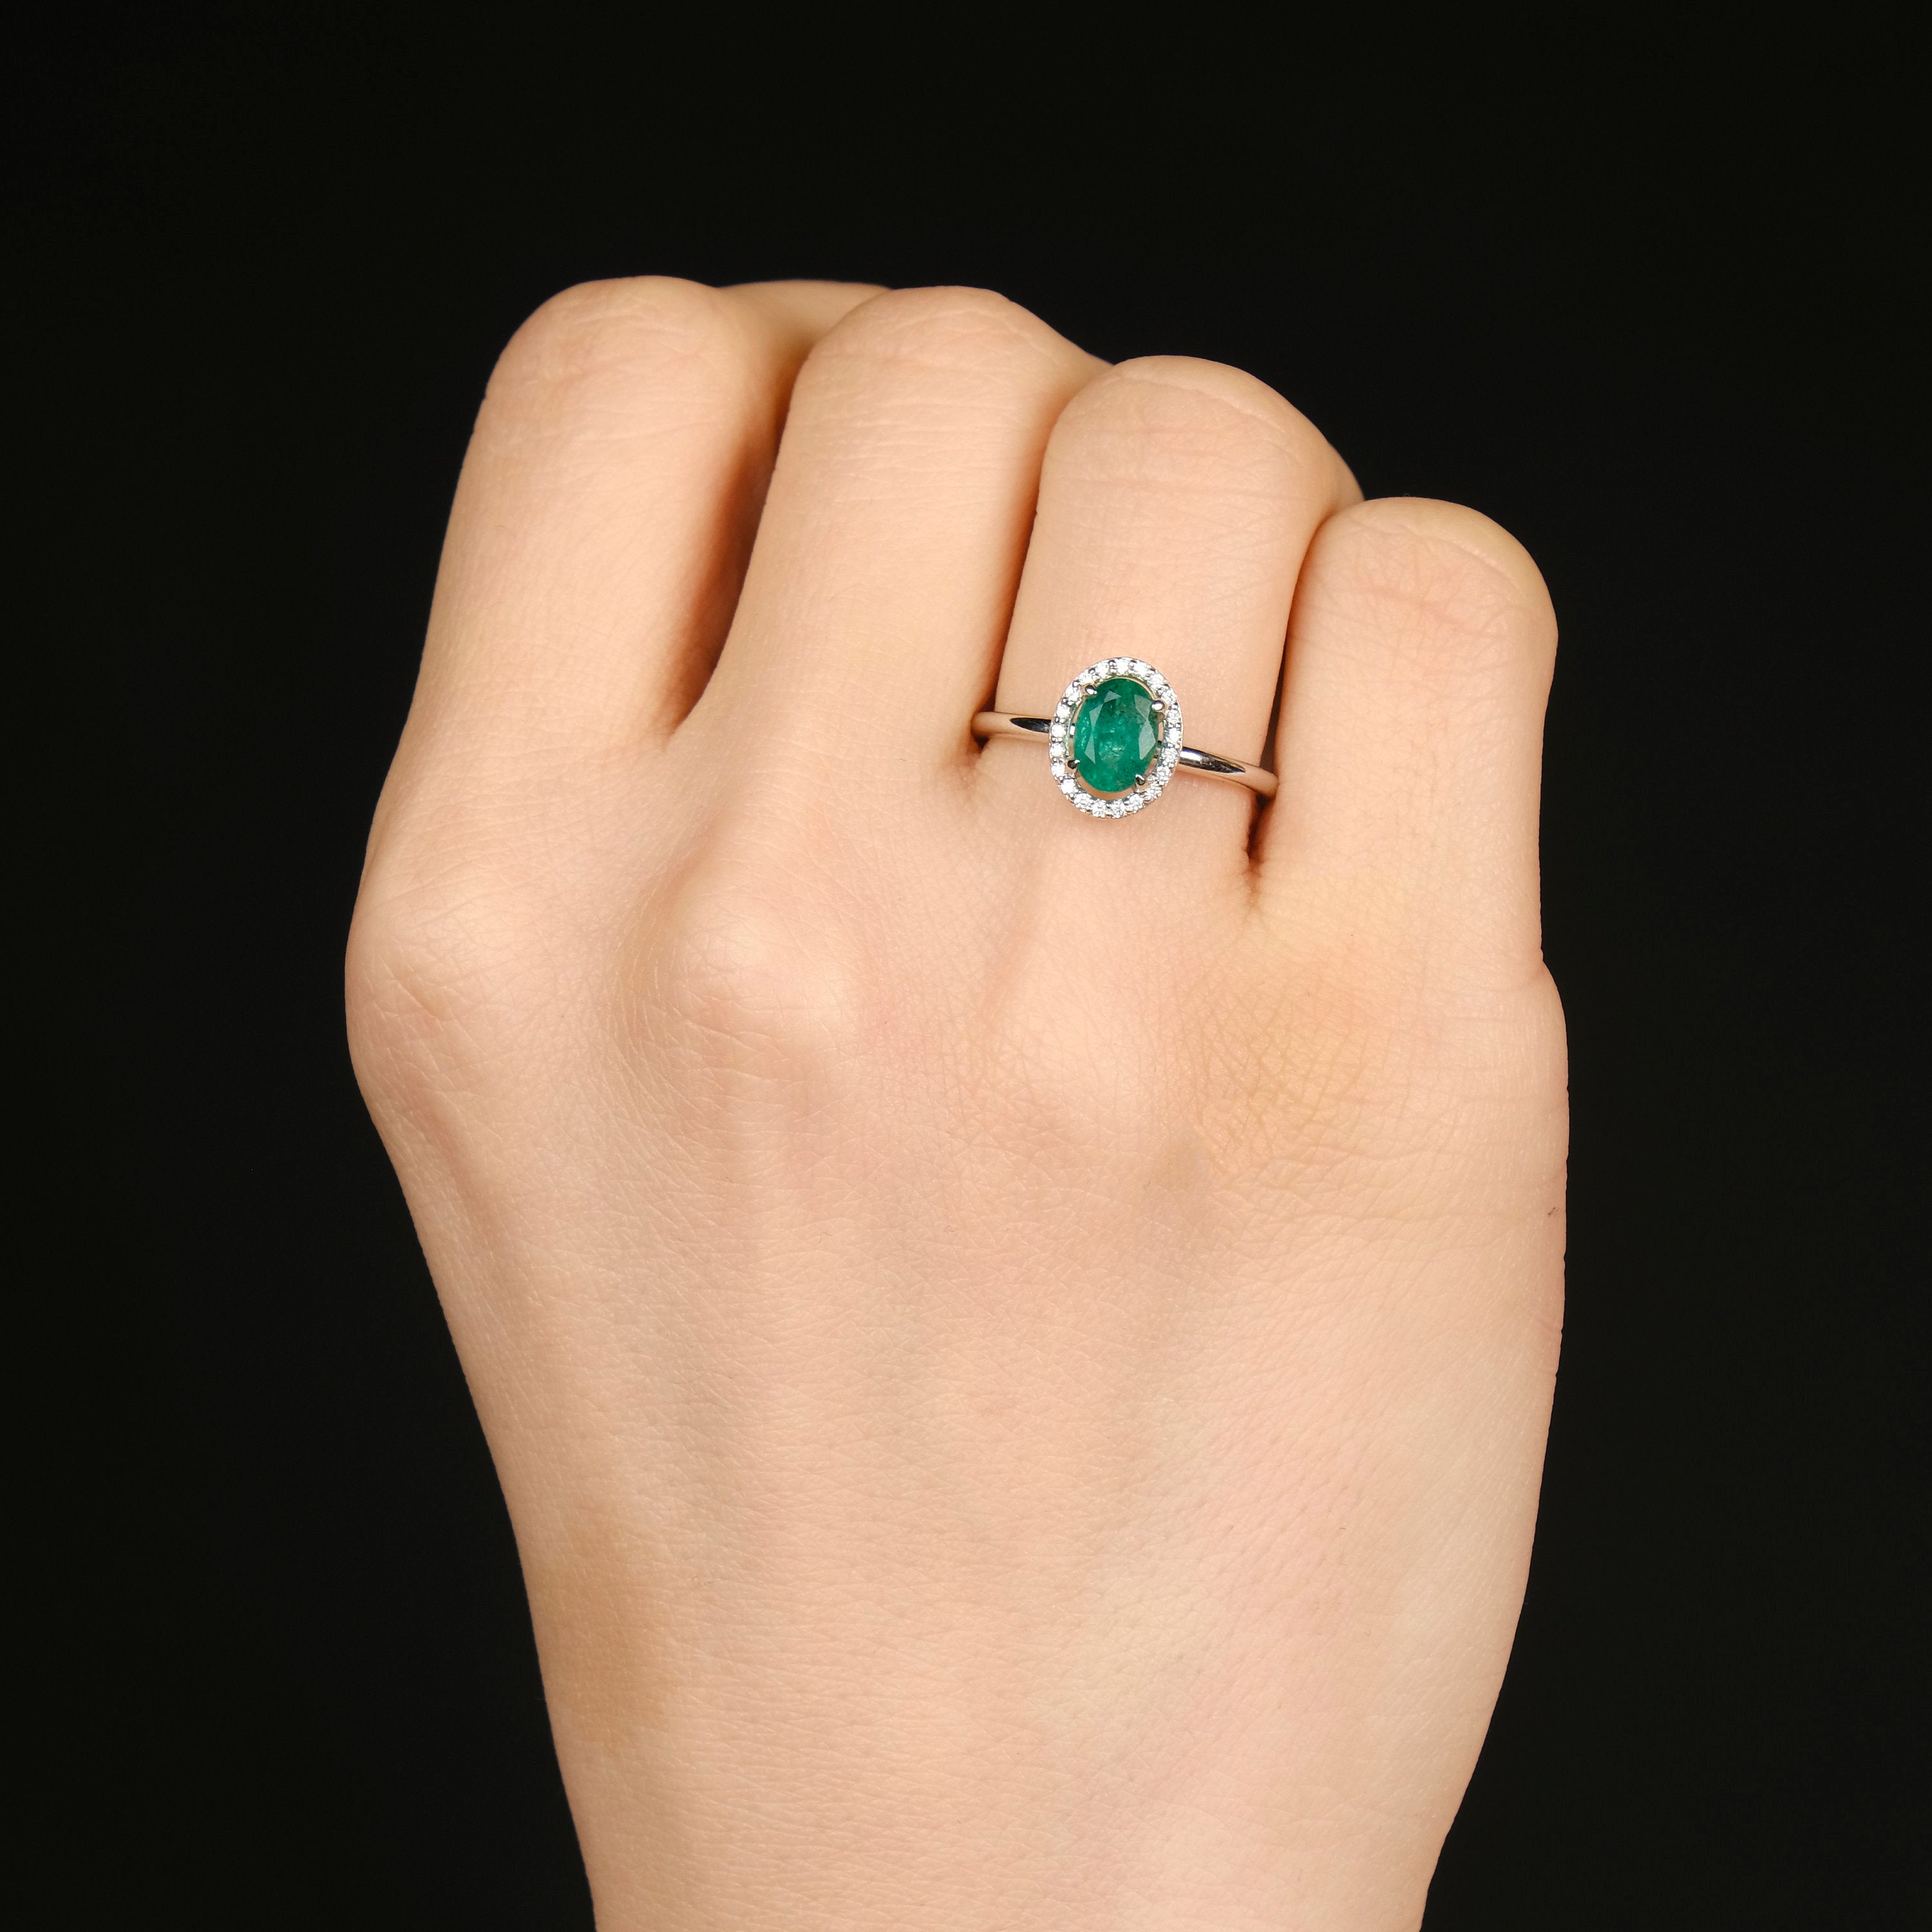 Oval Cut Emerald and Diamond Ring in 14K Gold